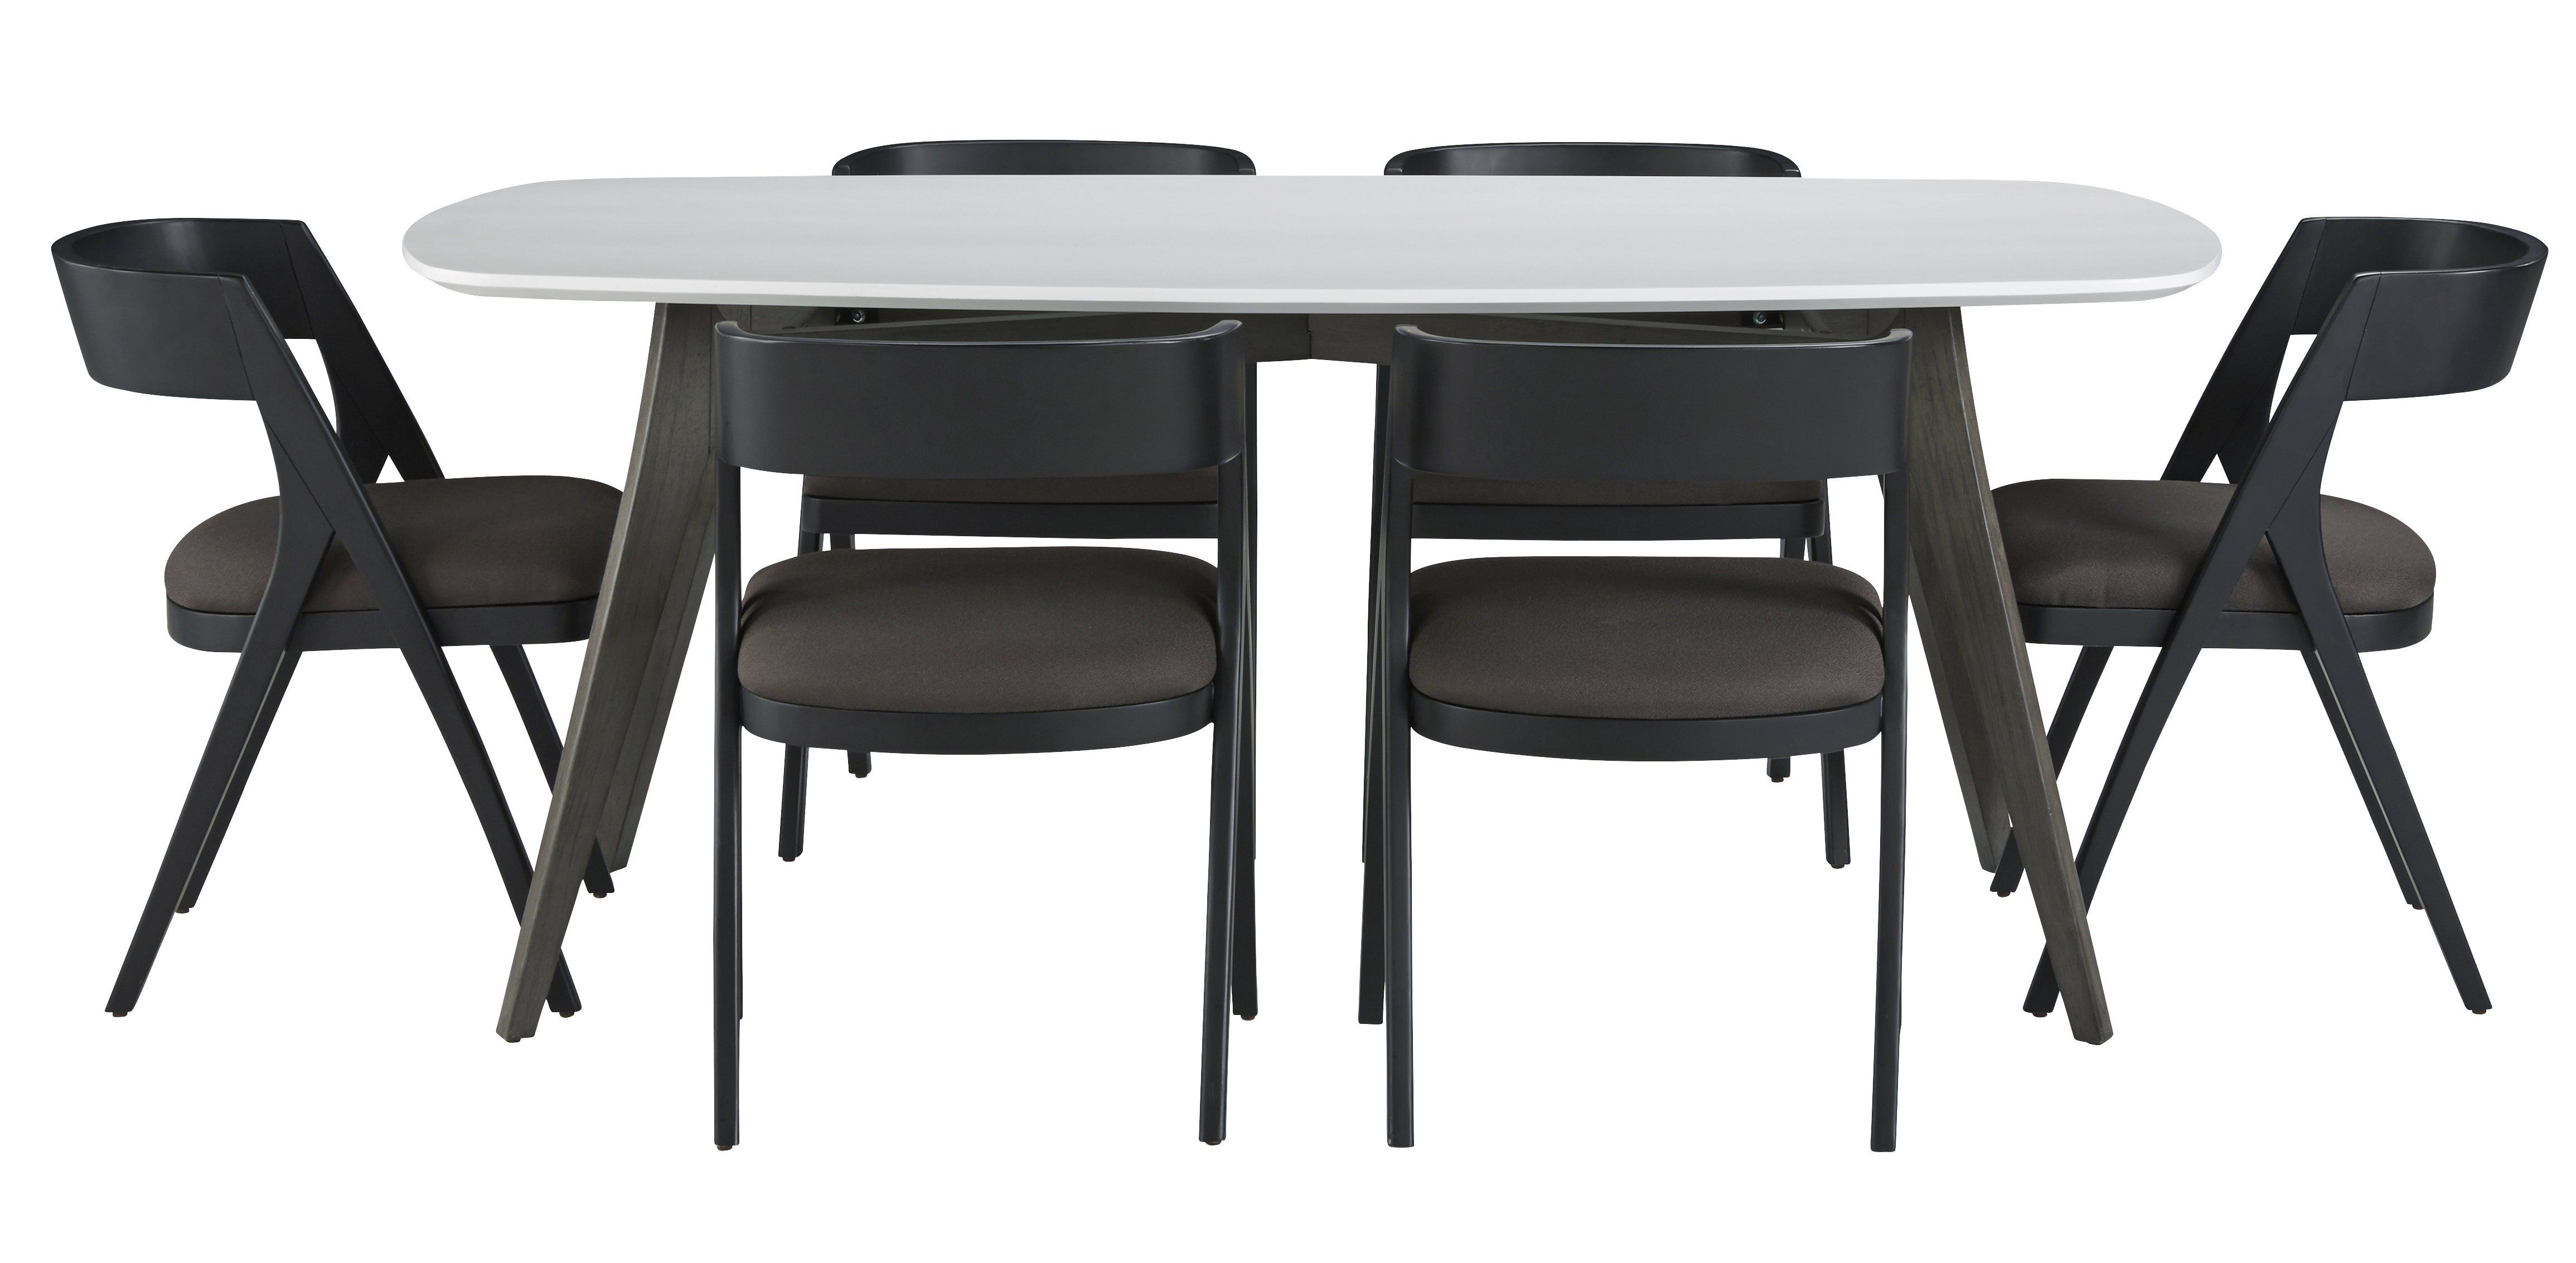 Dumfries 7 Piece Dining Set Intended For Best And Newest Frida 3 Piece Dining Table Sets (Photo 4 of 20)